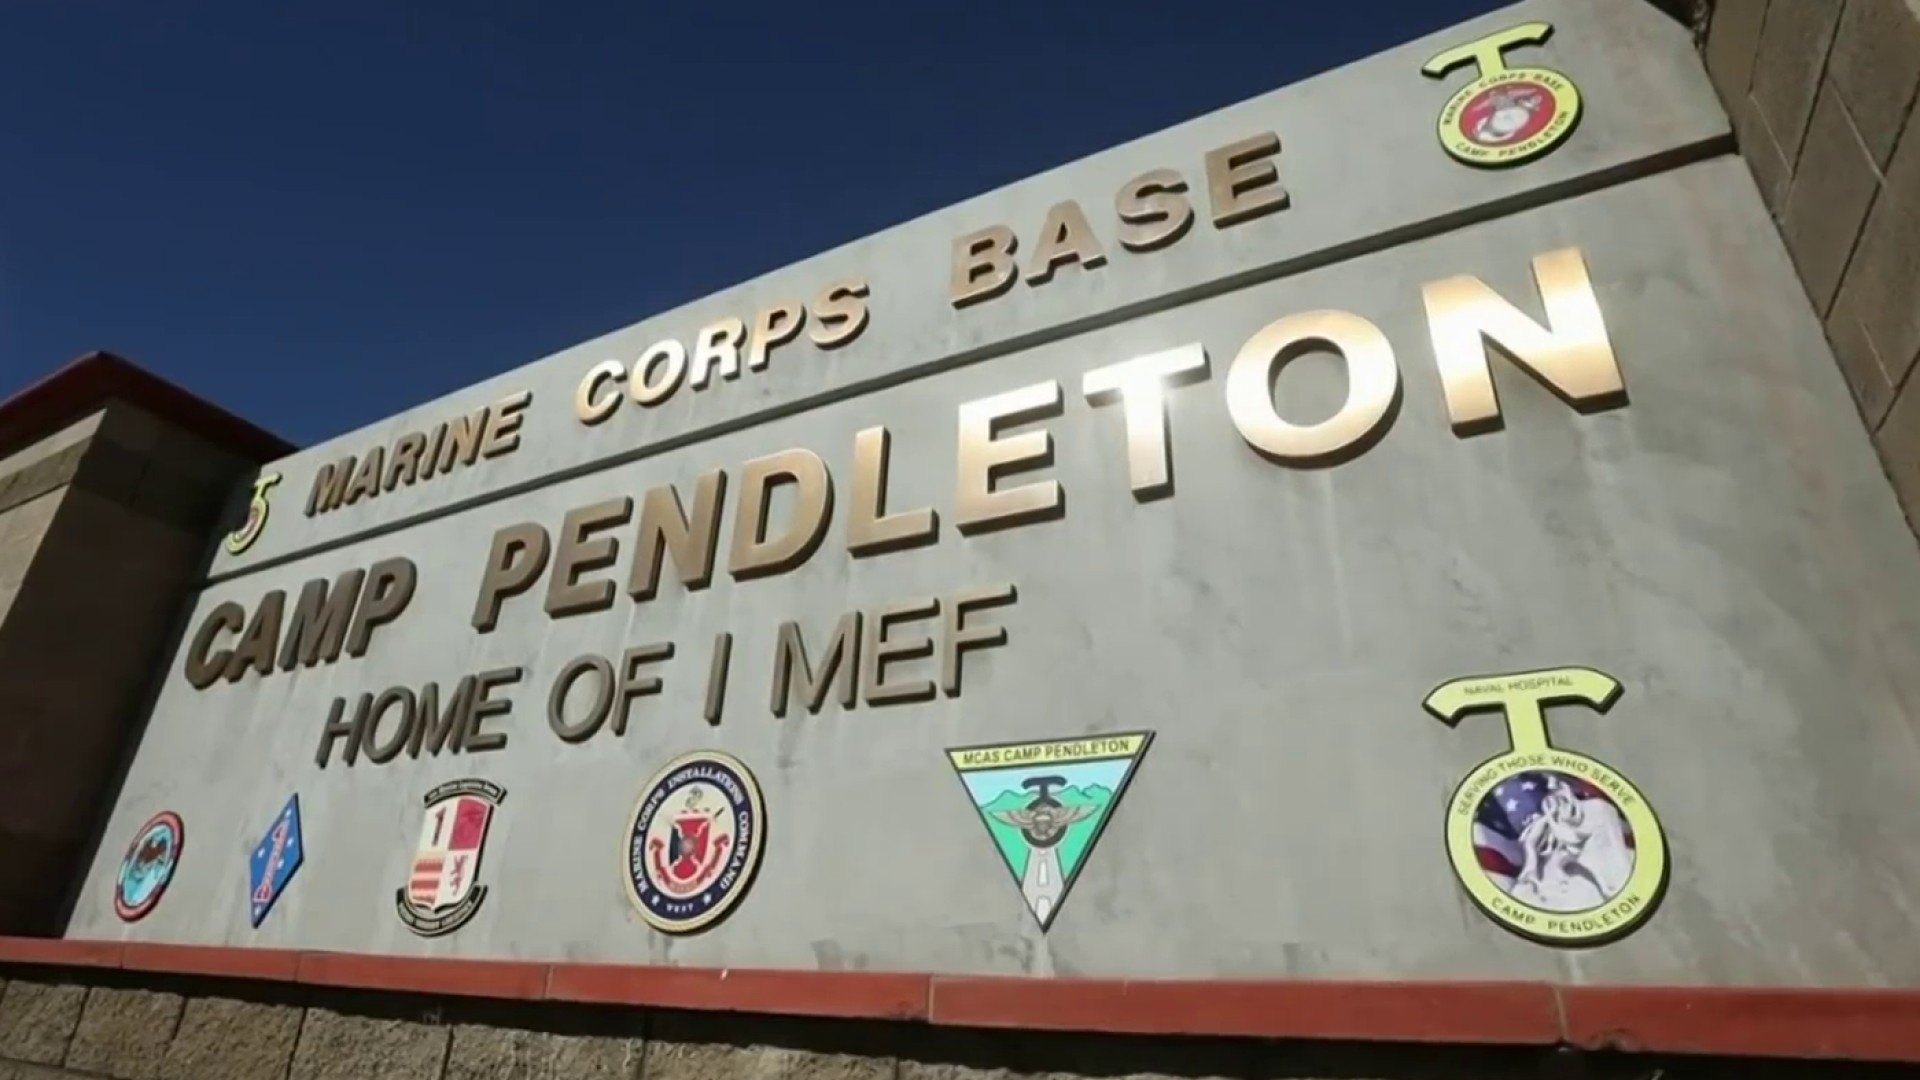 Teen missing for 18 days found in barracks at Camp Pendleton; San Diego Sex Trafficking Task Force Investigating pic